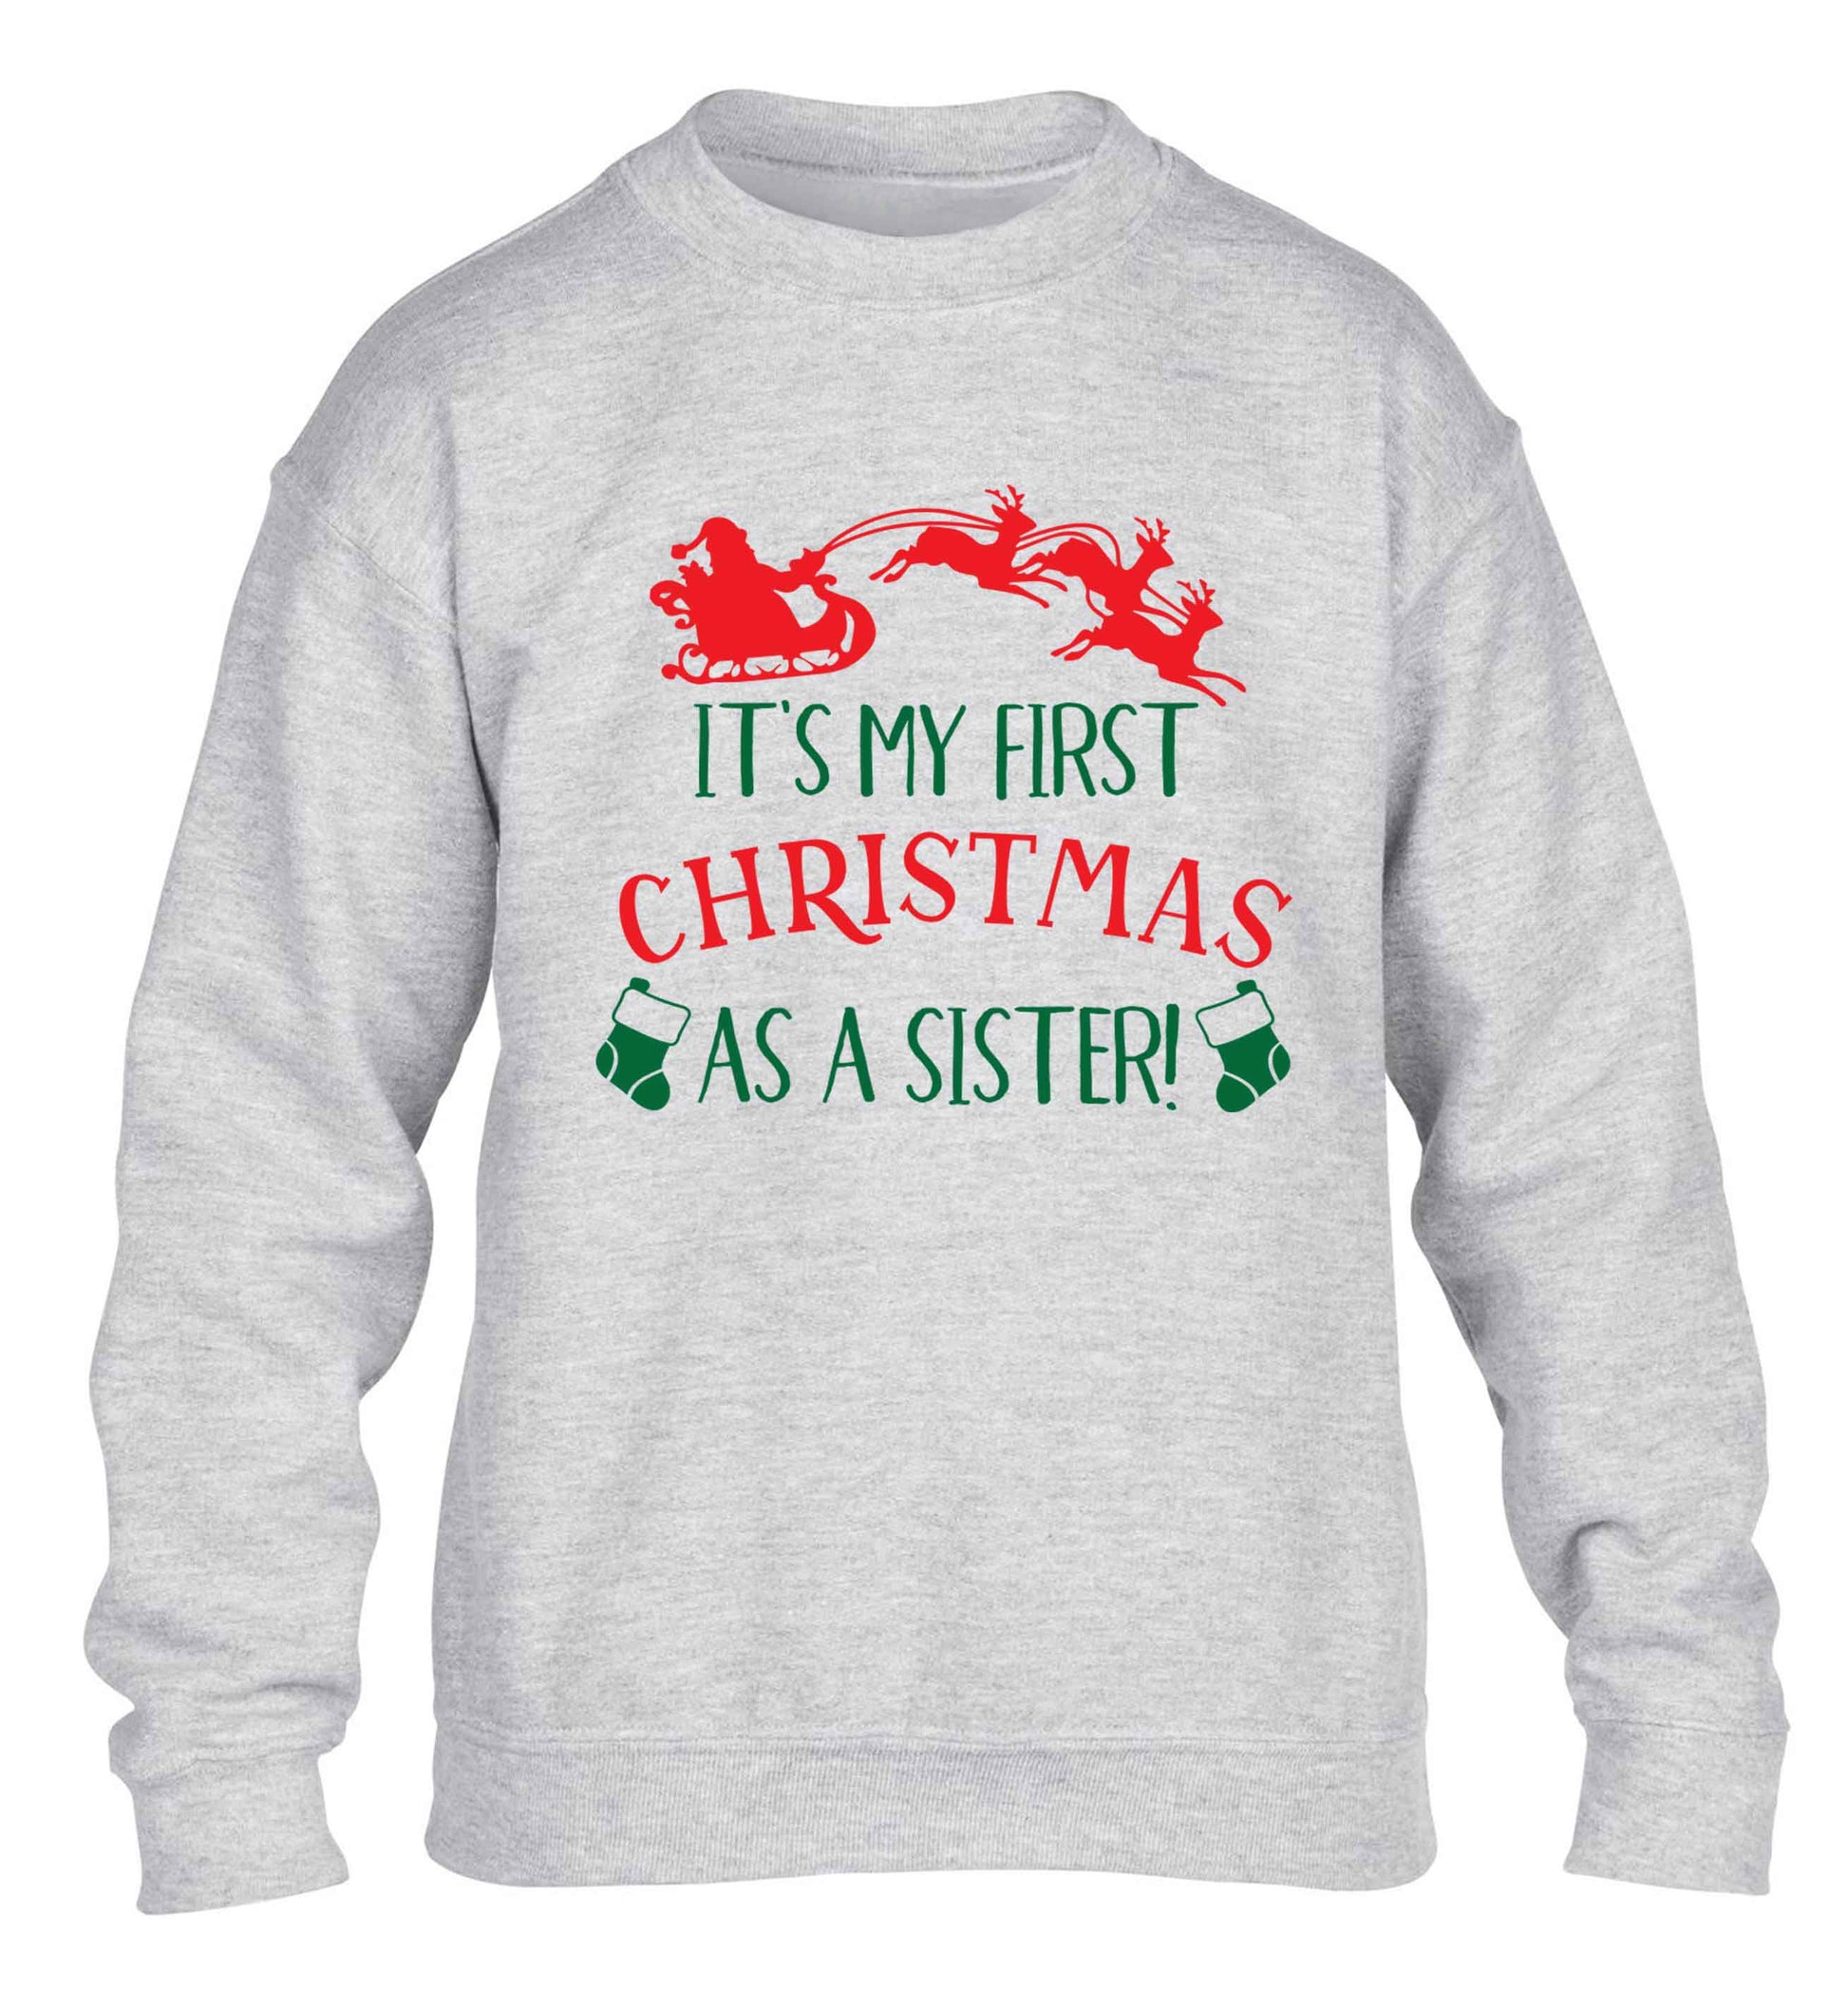 It's my first Christmas as a sister! children's grey sweater 12-13 Years